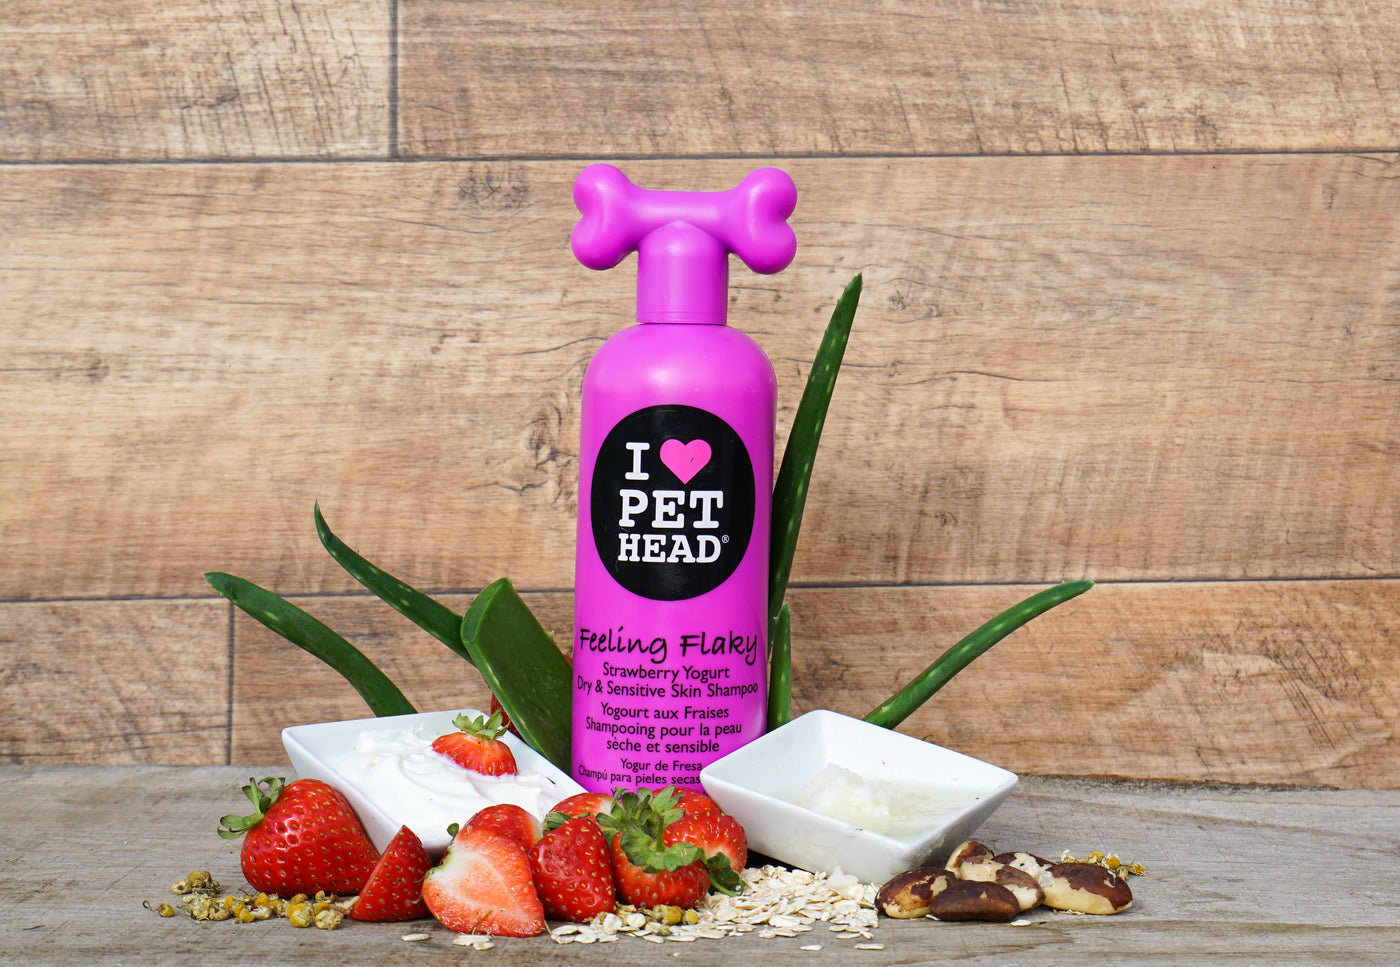 Pet Head Dog Grooming Products